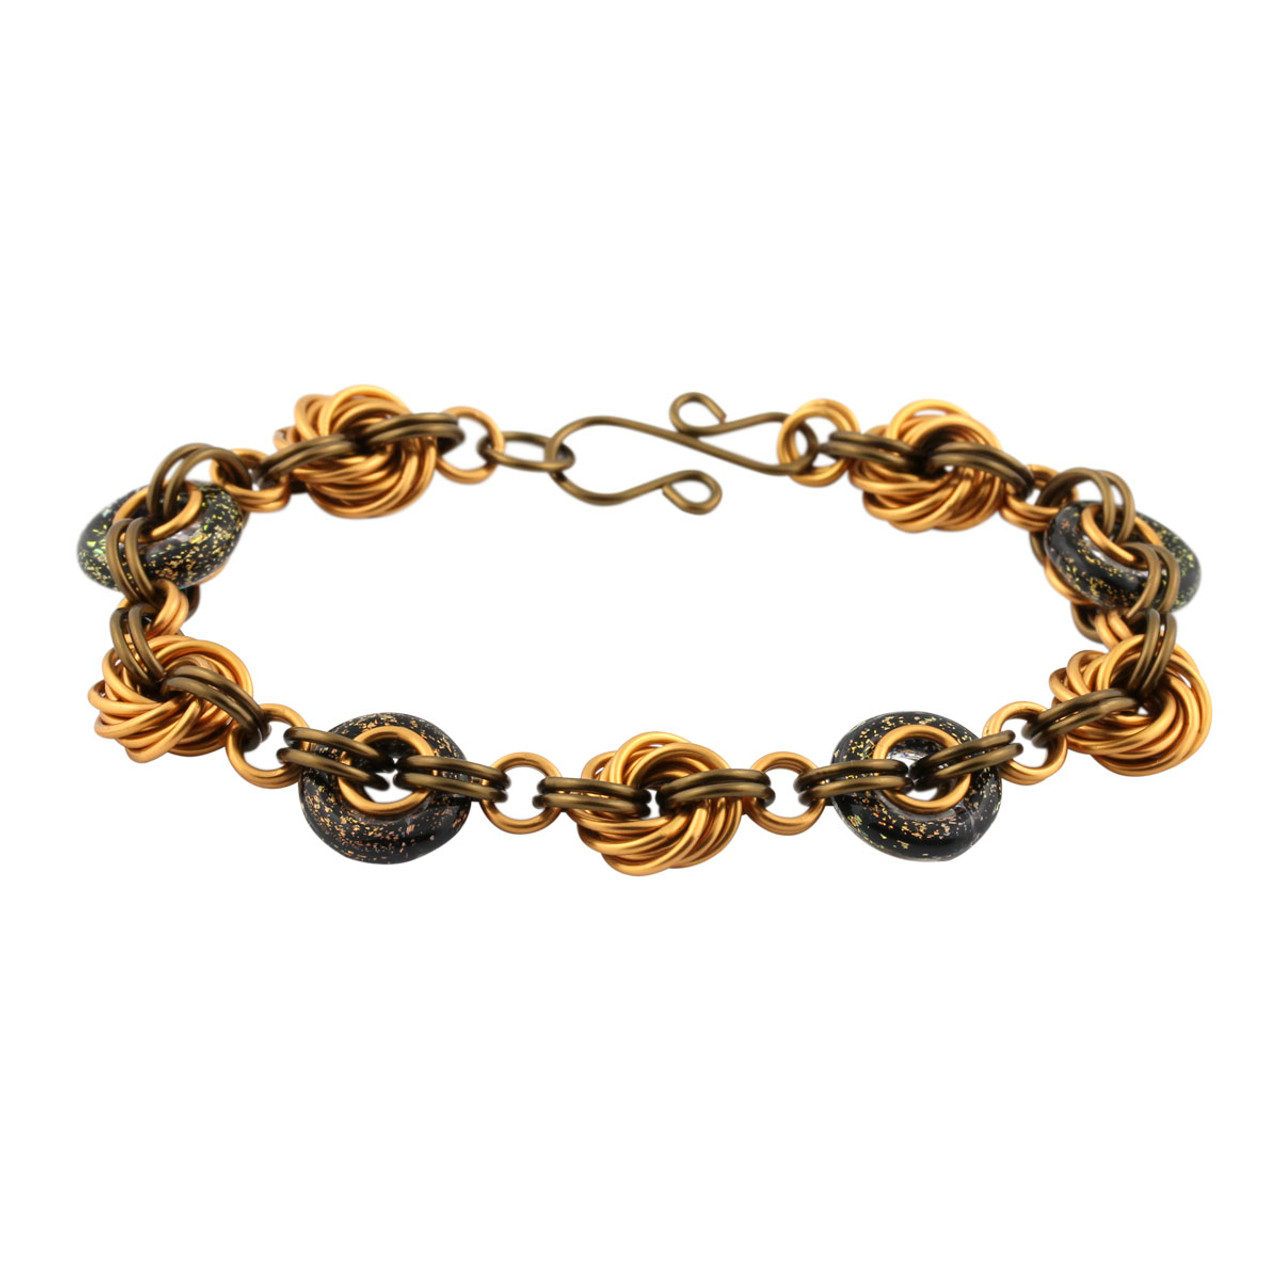 How to make a gold chain bracelet